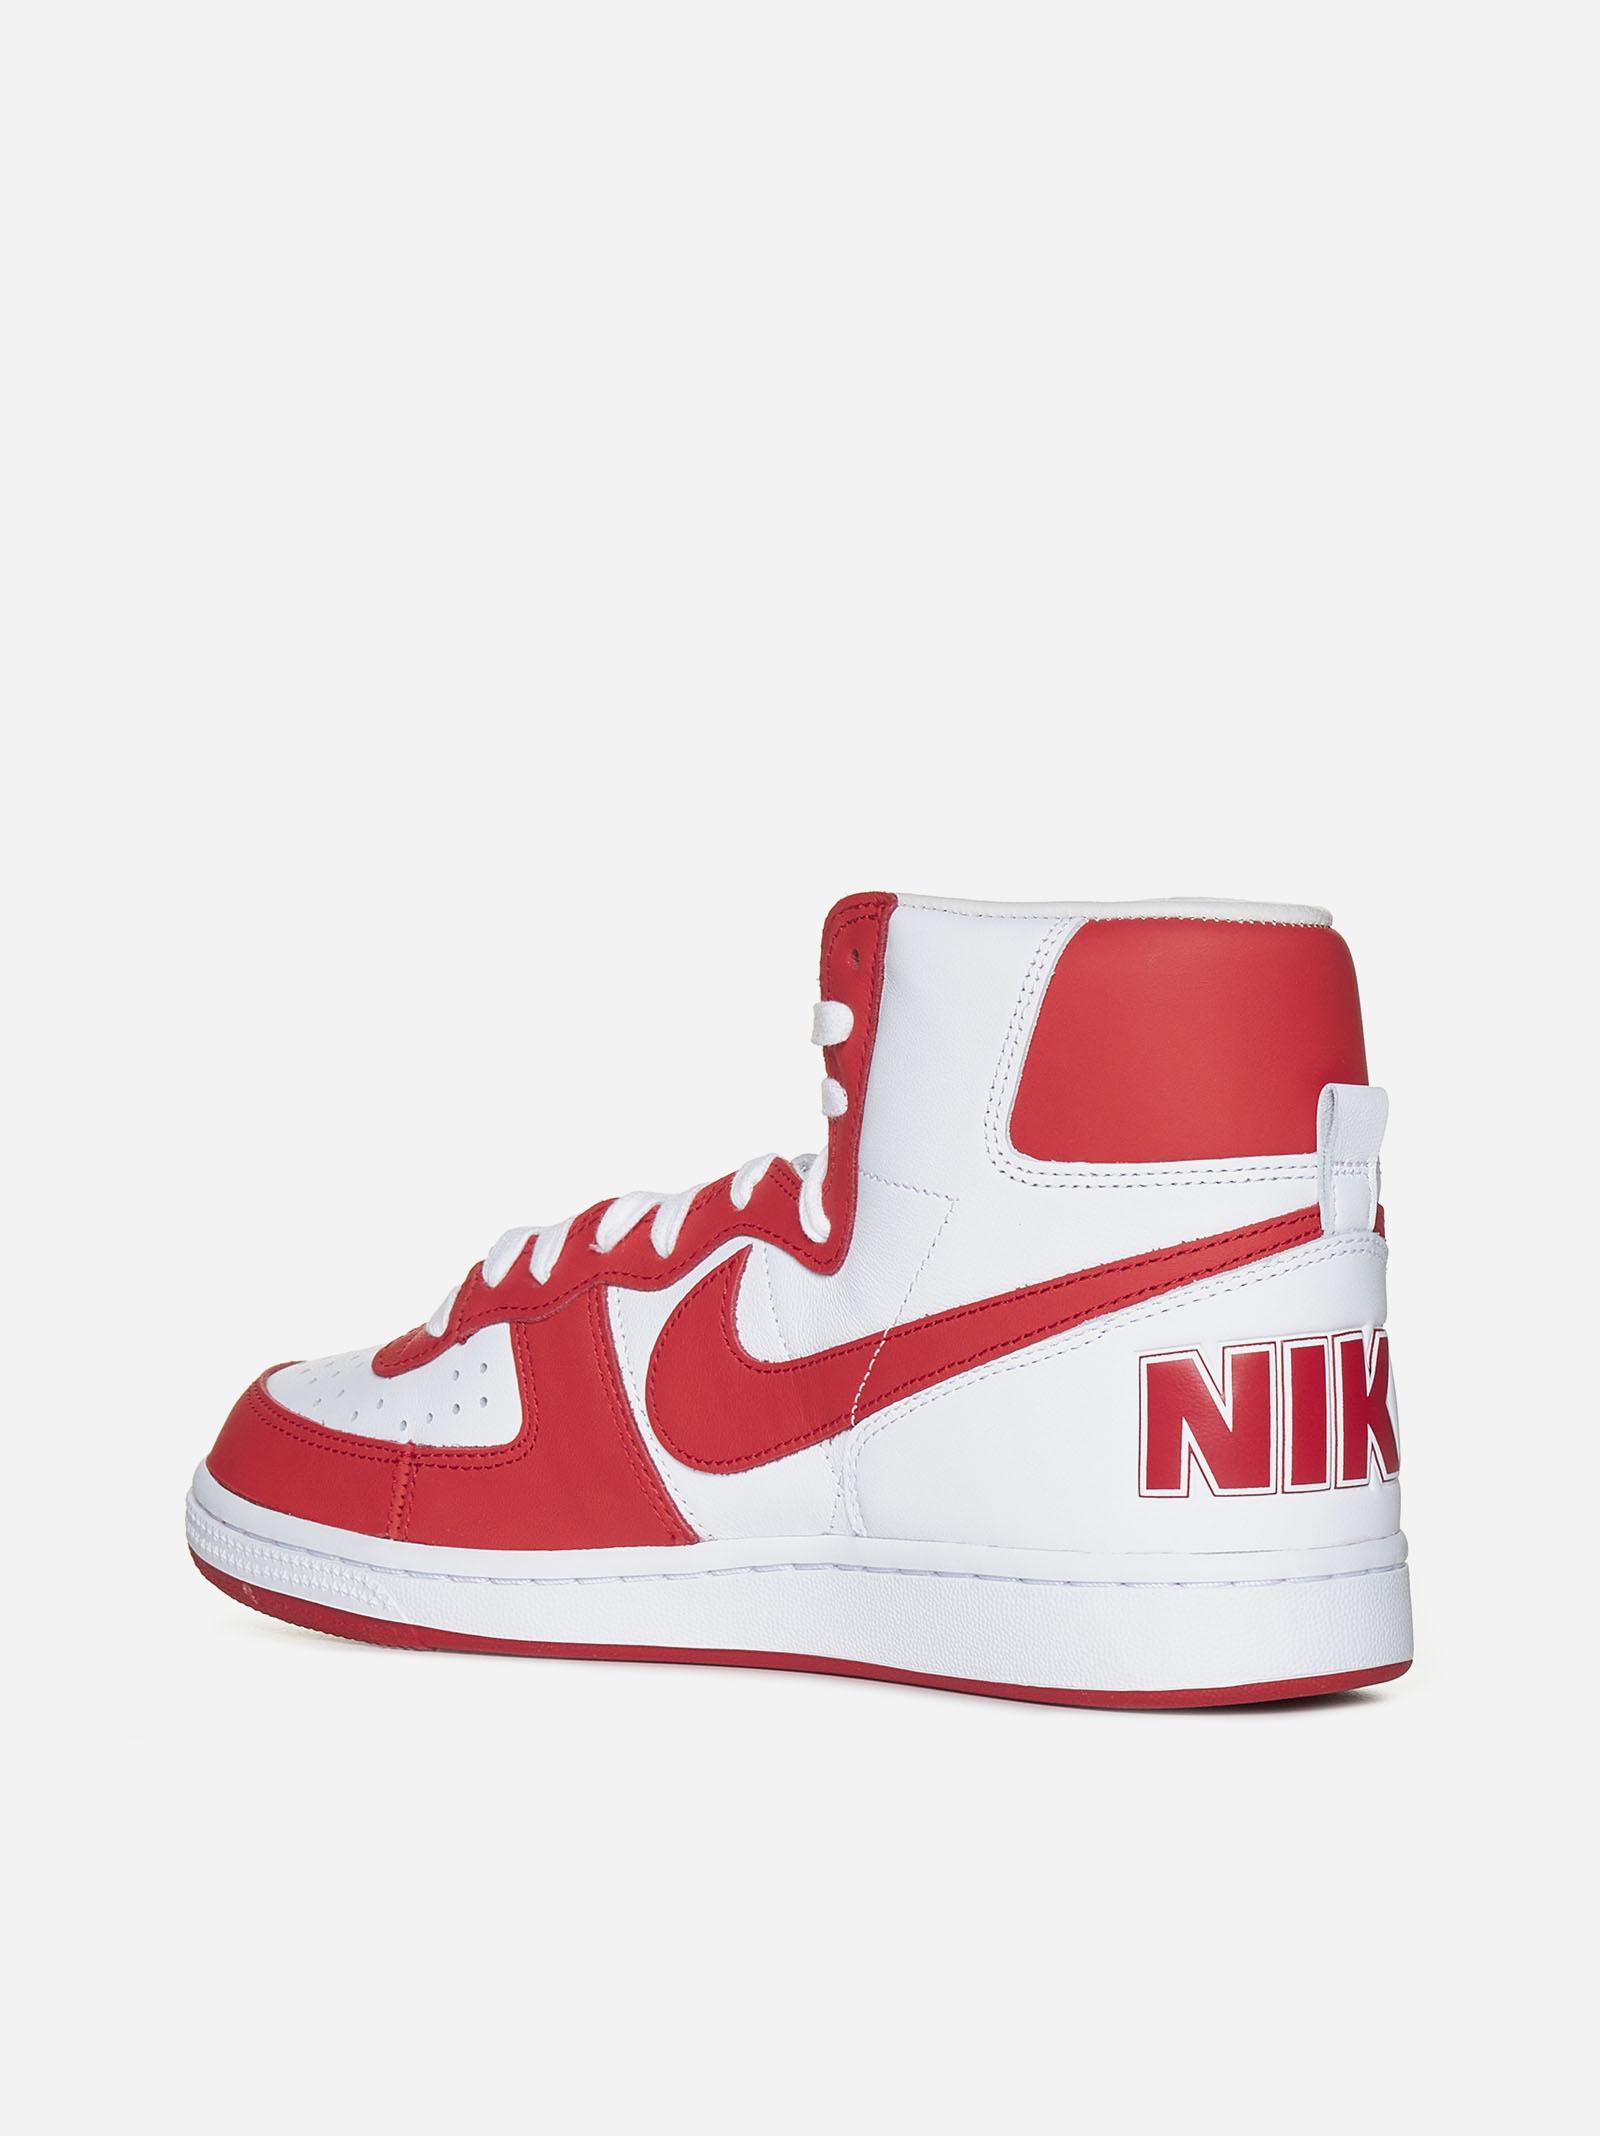 Nike Nike X Cdg Hp High Terminator Leather Sneakers in Red for Men | Lyst